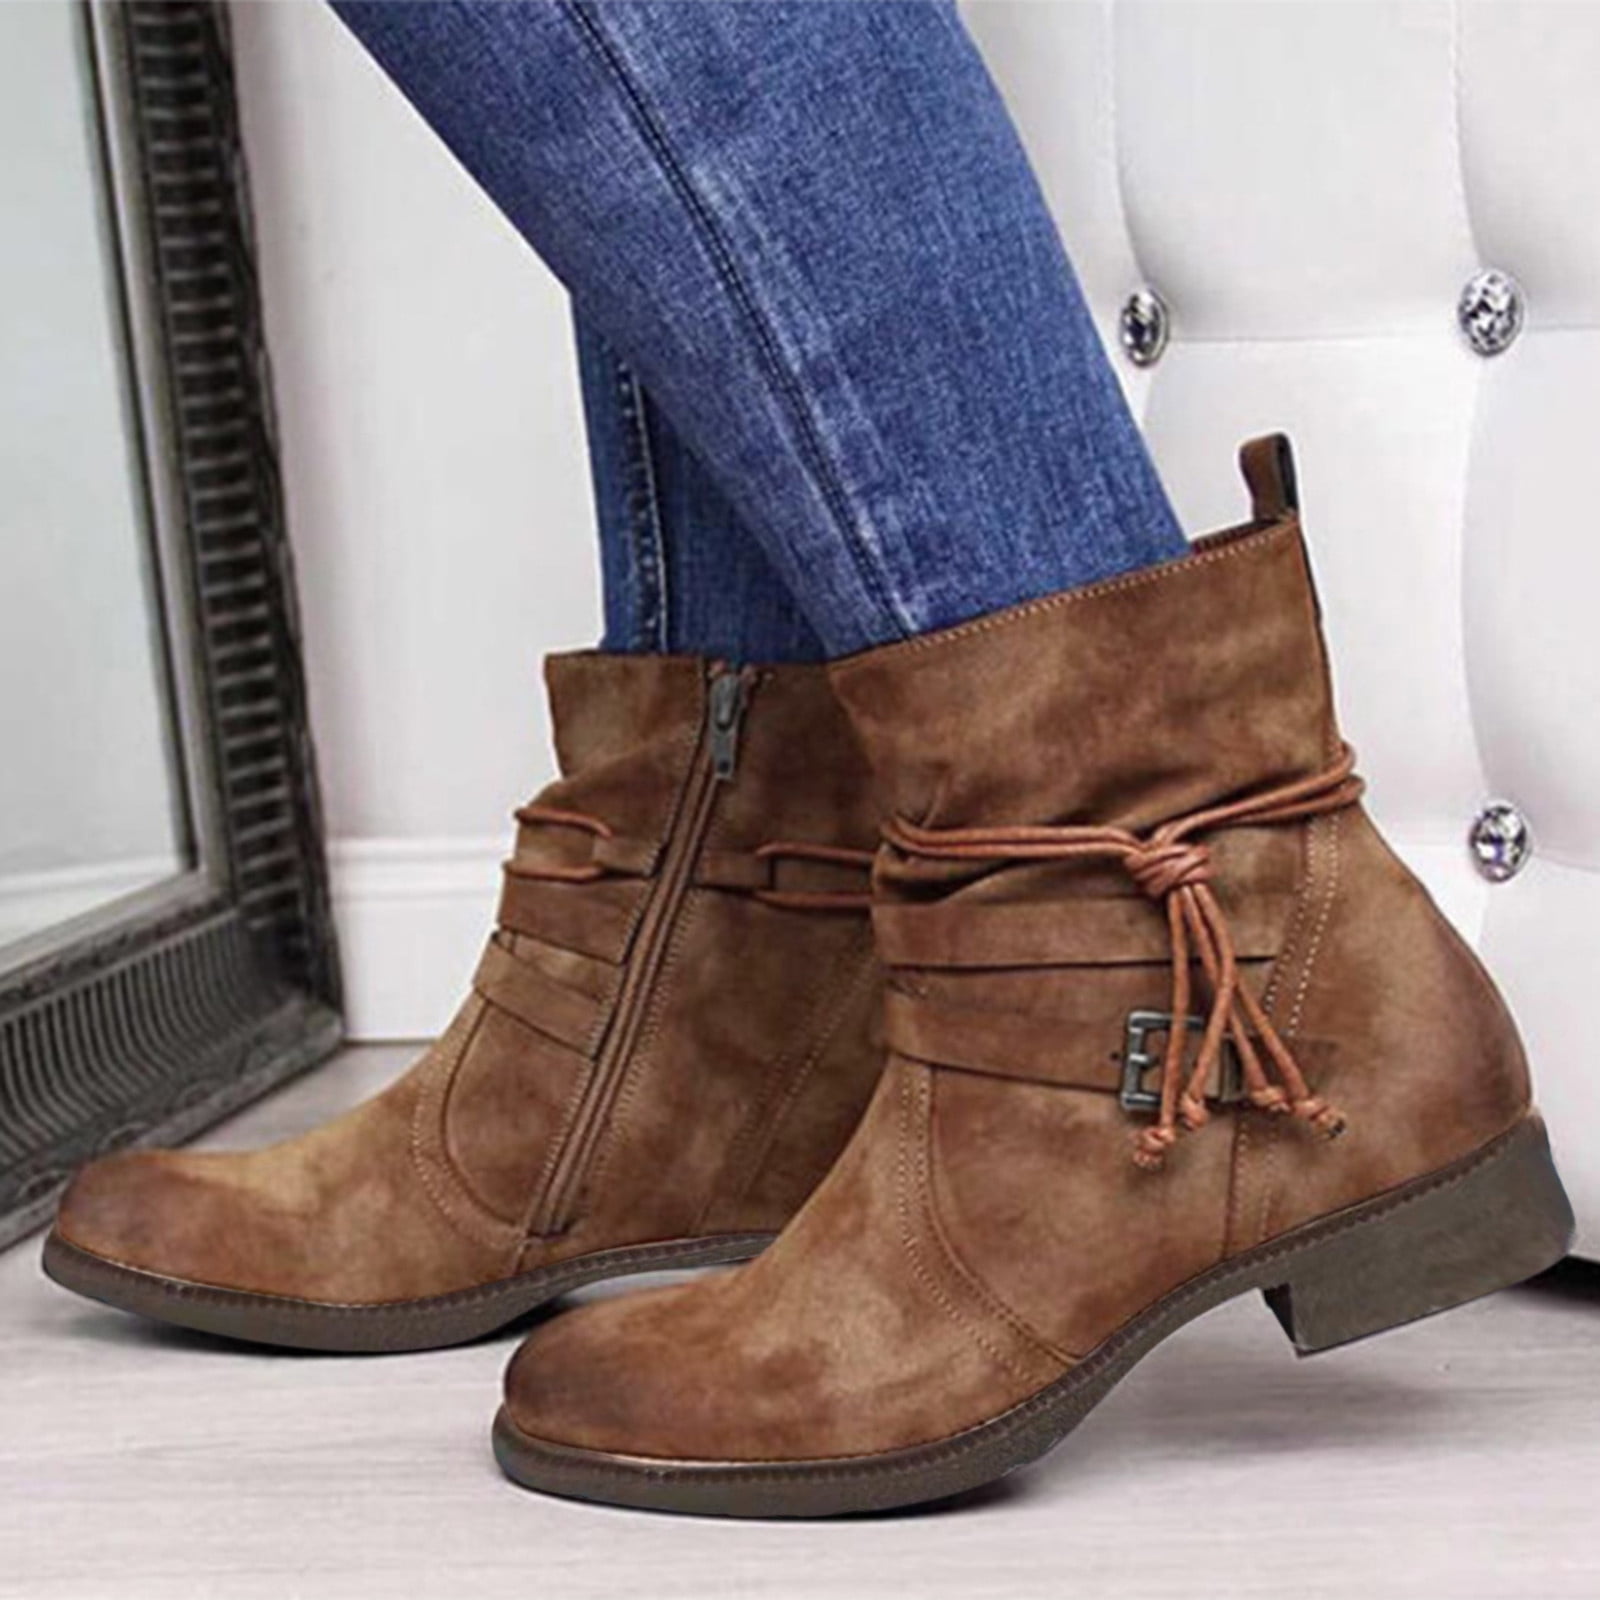 Gomelly Platform Boots for Women Heeled Combat Boots Chunky Heel Booties  Round Toe Lace Up High Heel Ankle Boots Brown Yellow 9 - Walmart.com